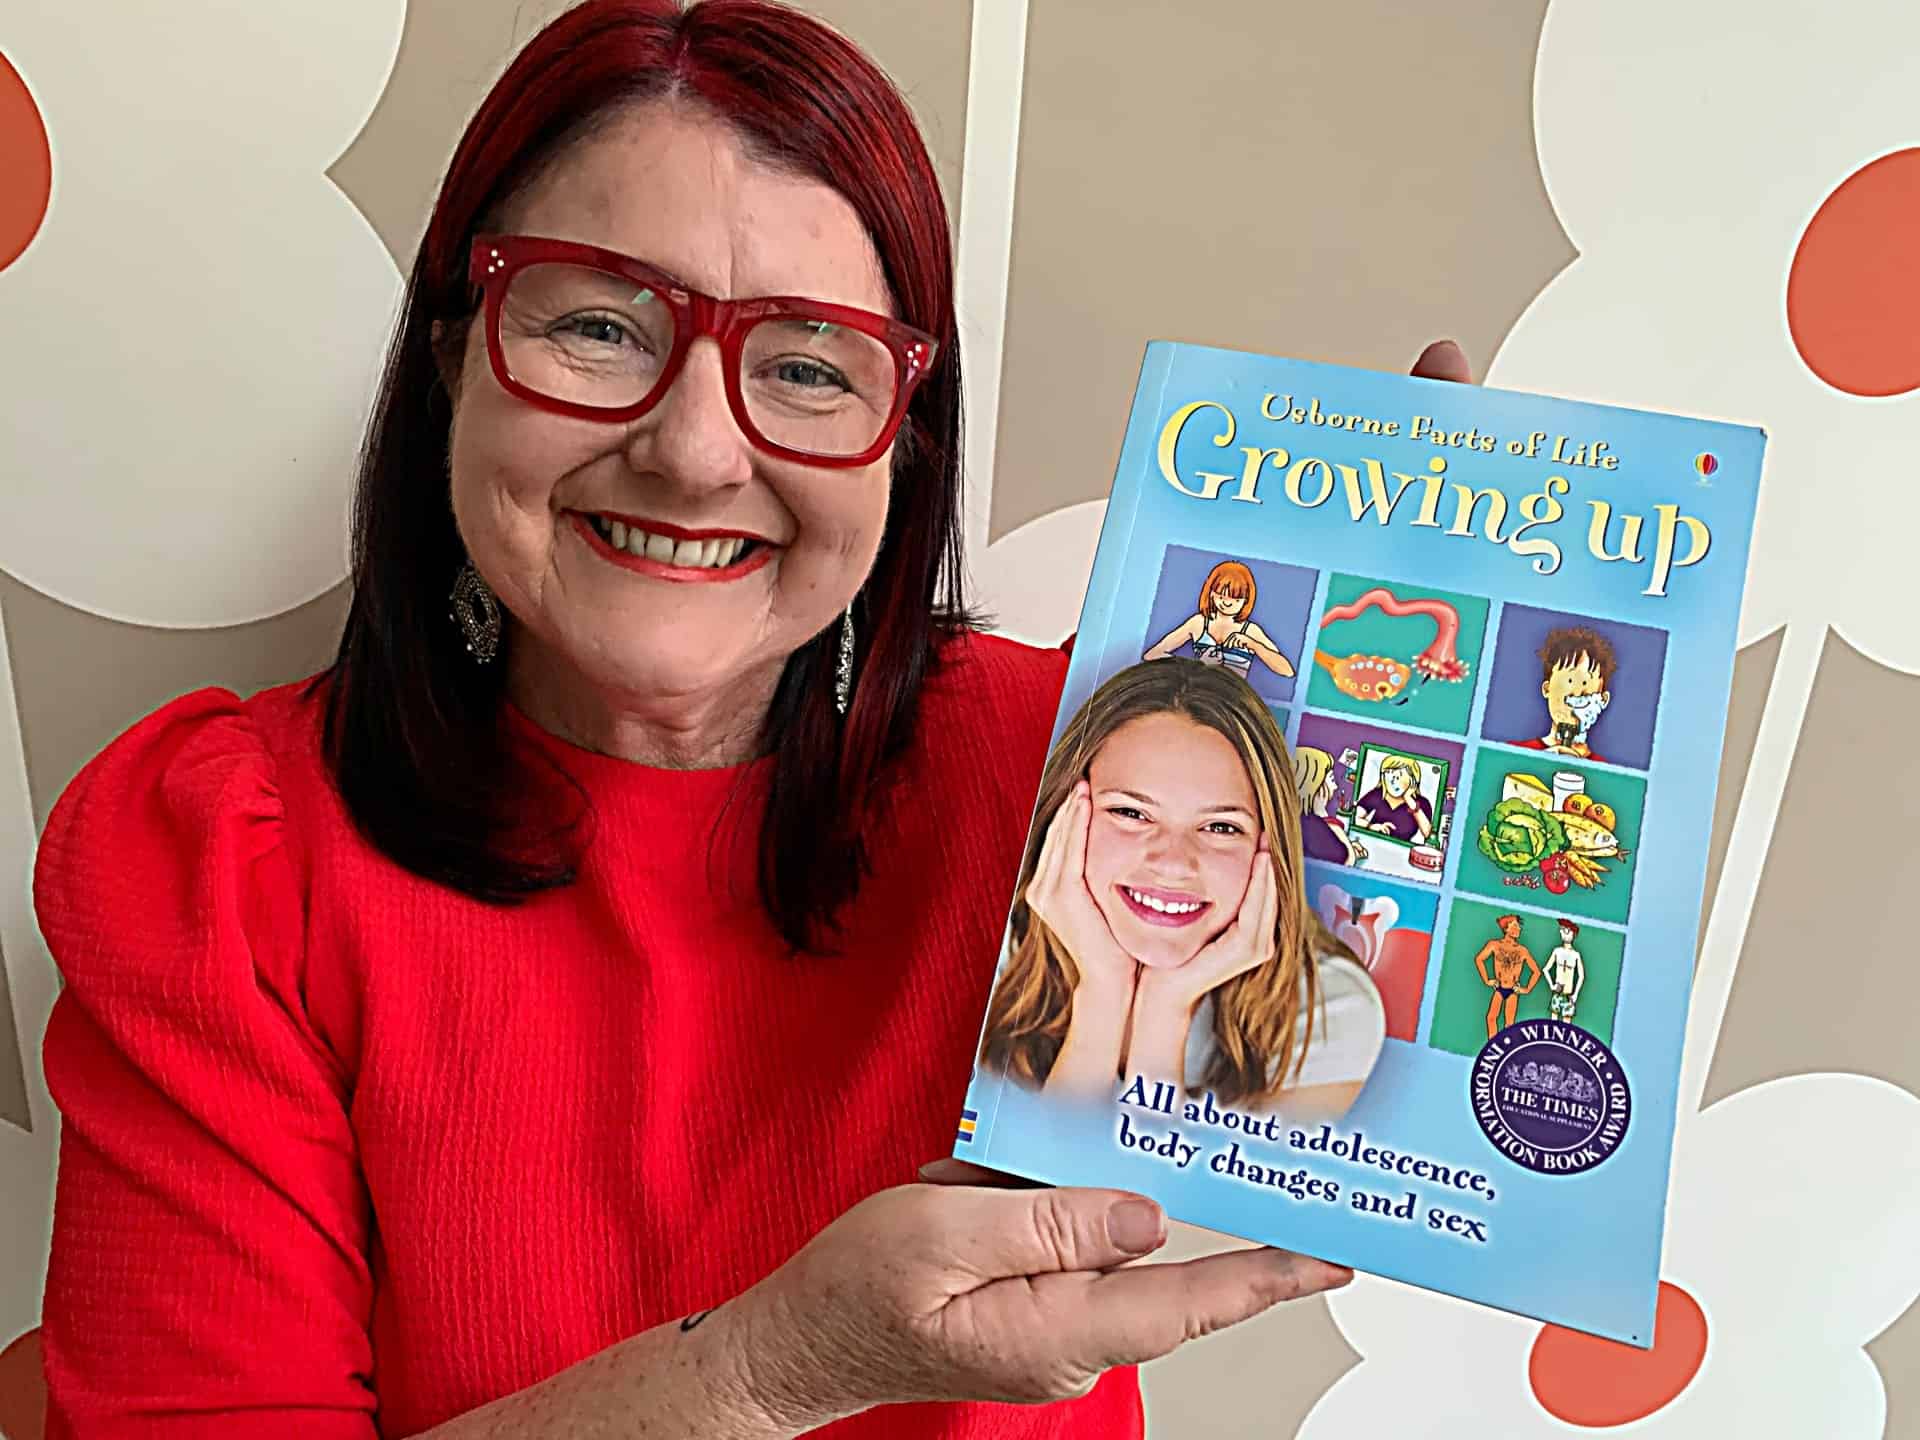 Growing Up (Usborne Facts of Life) - Book review by Rowena Thomas | 'Amazing Me'